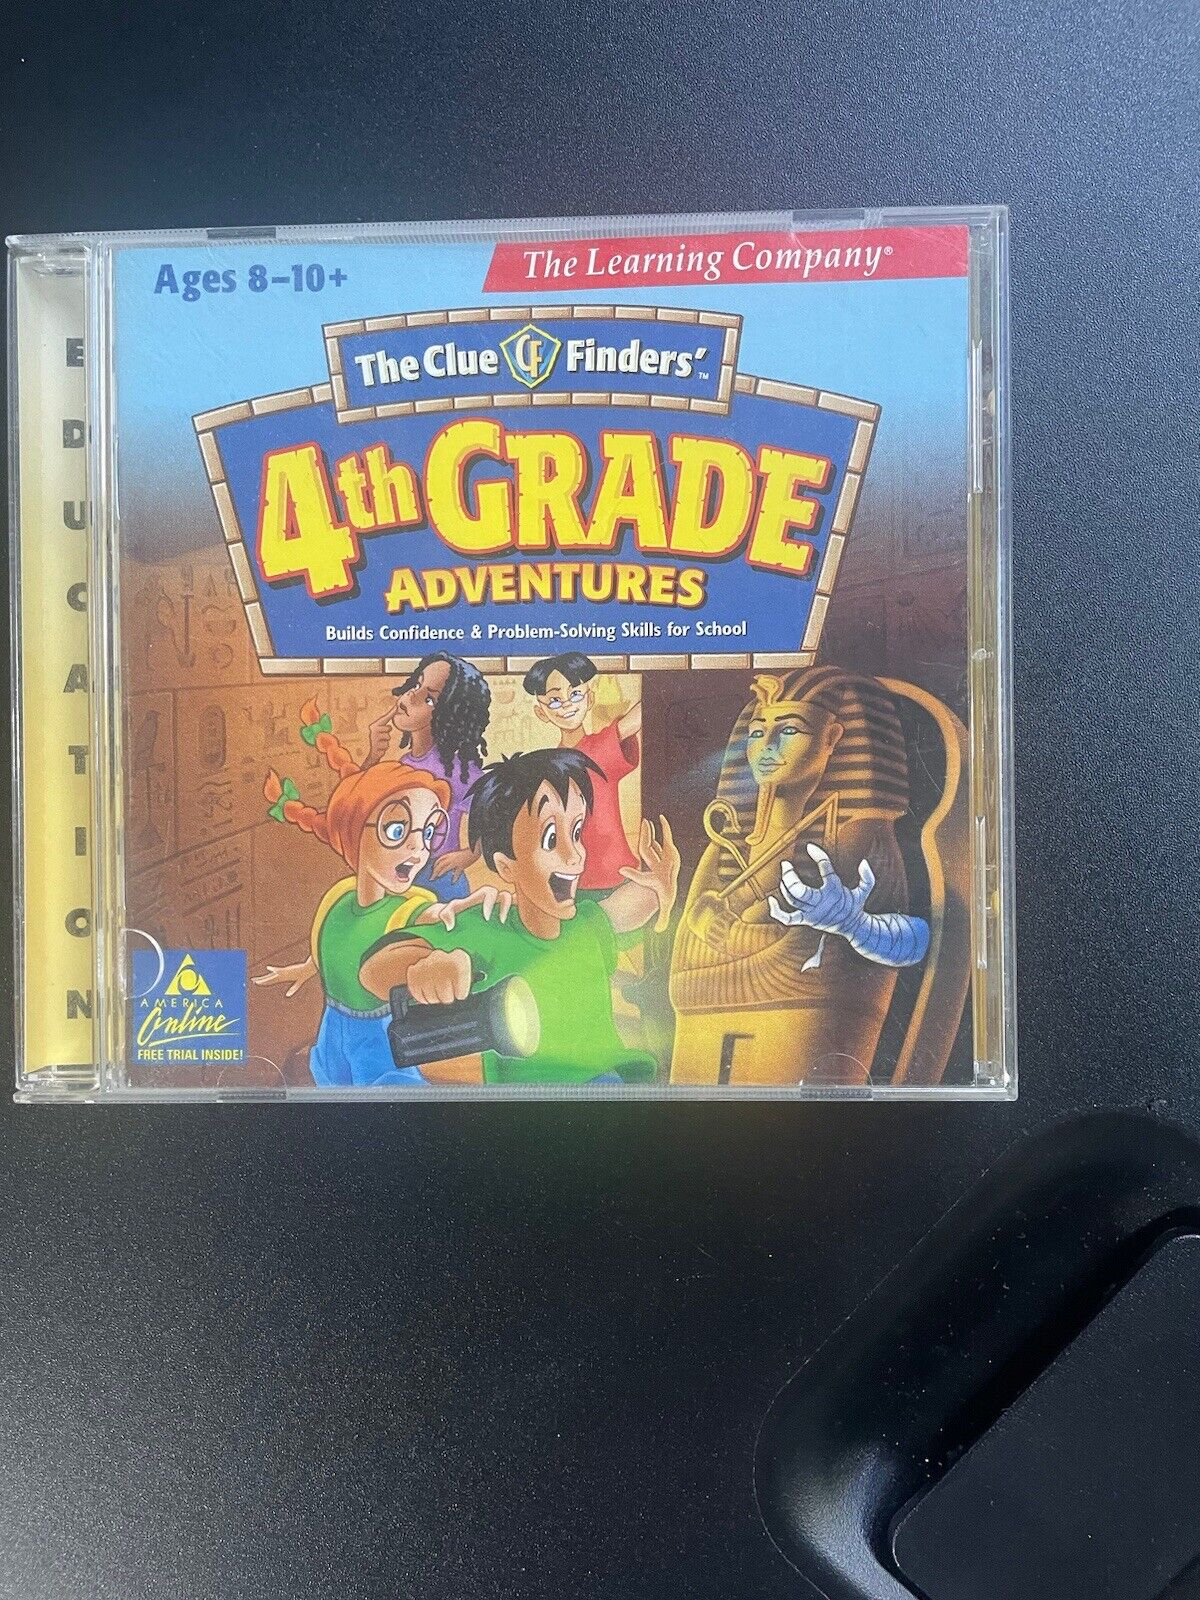 Clue Finders 4th Grade Adventures: Puzzle of the Pyramids for WIN & MAC. CD